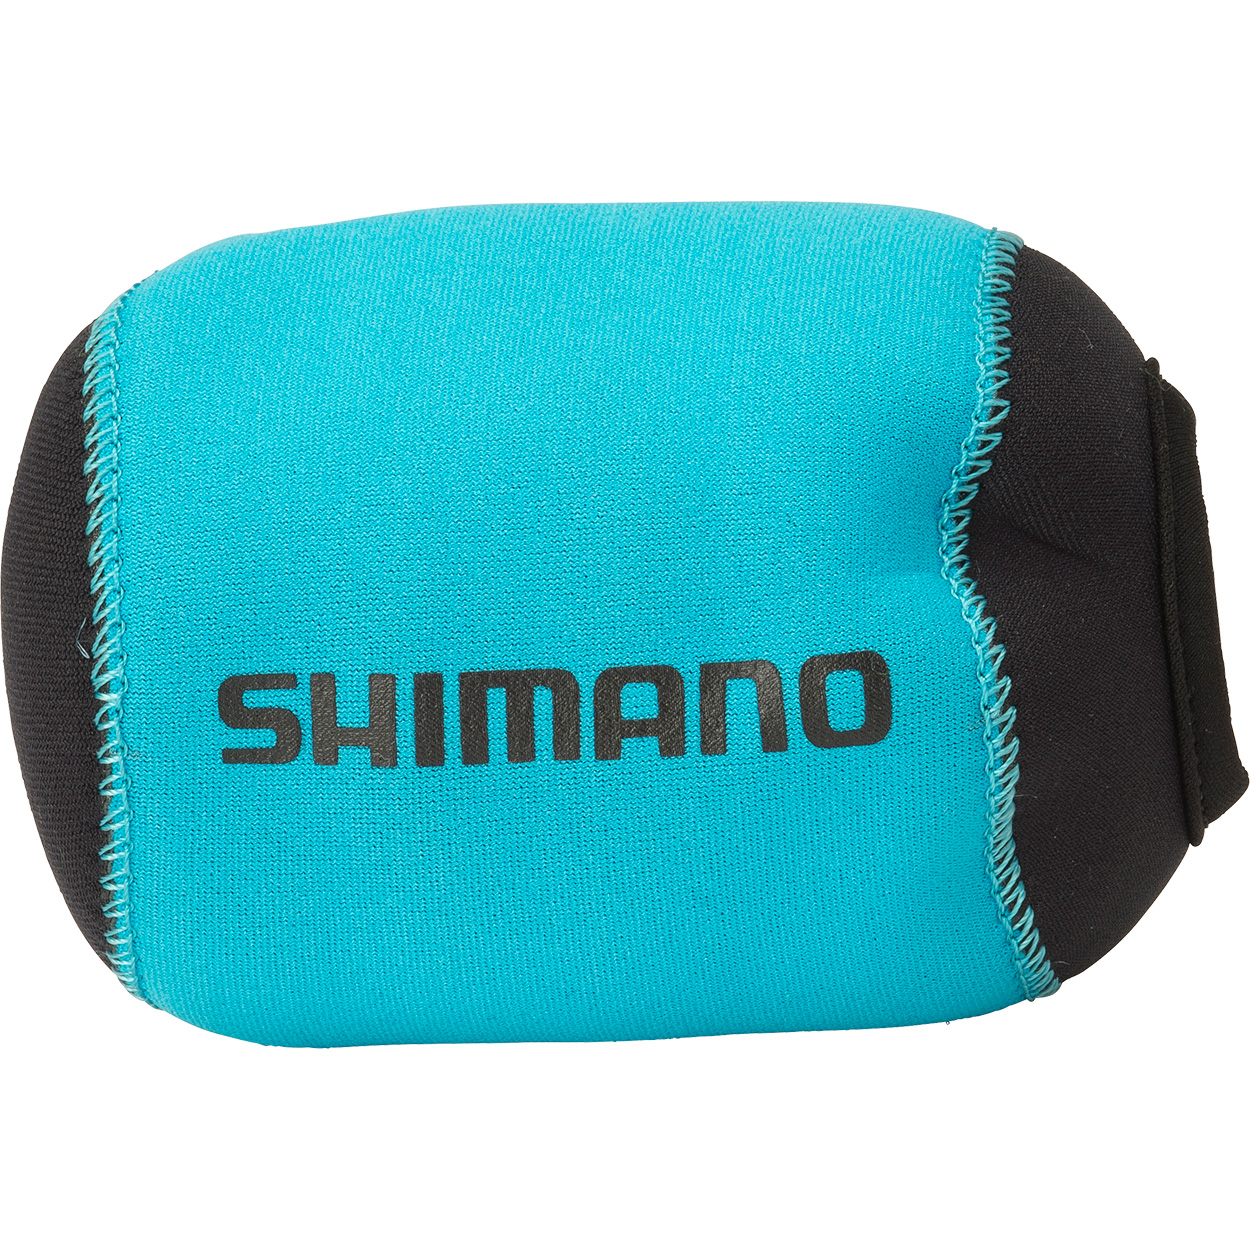 Shimano Spin Reel Covers - Compleat Angler Ringwood